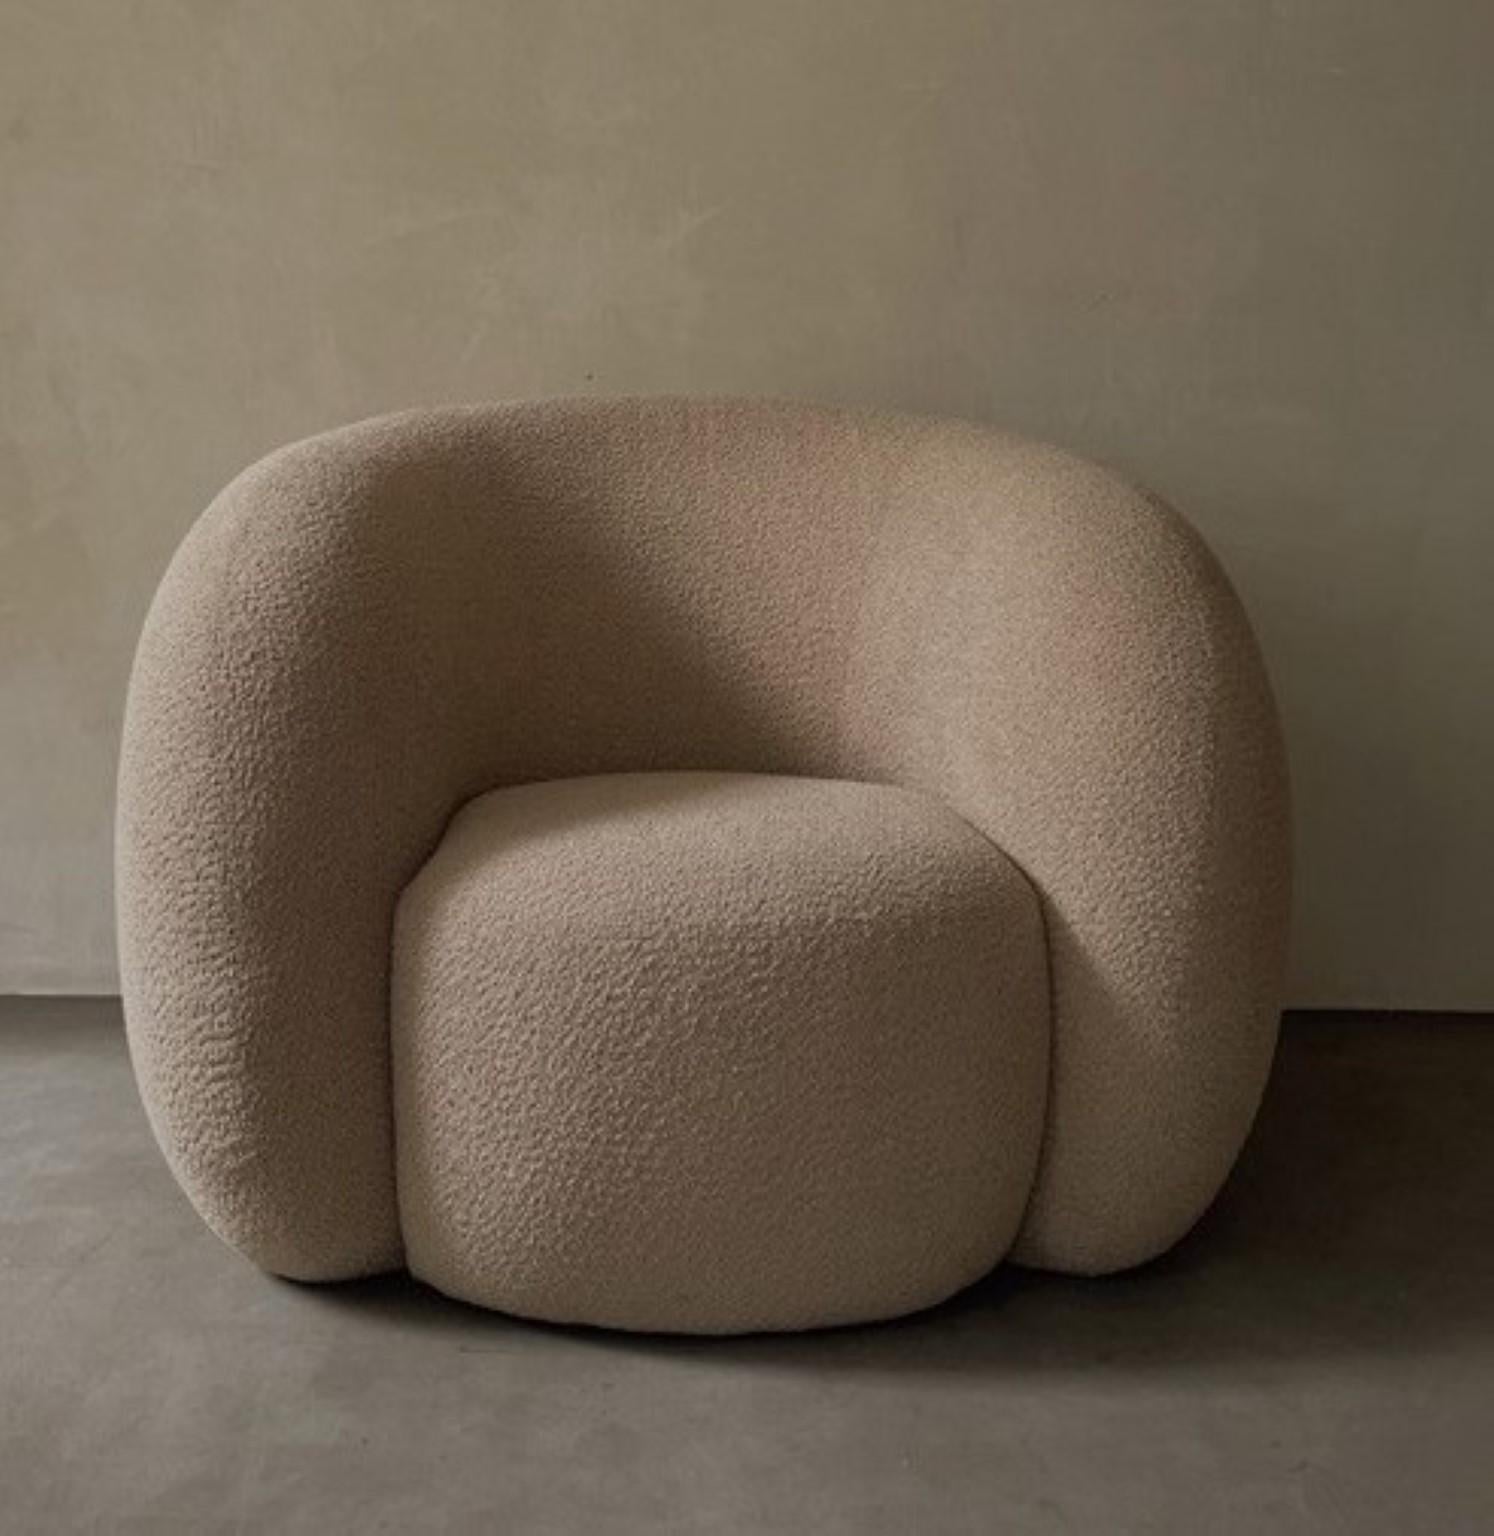 Circular lounge chair by Karstudio
Dimensions: W 105 x D 93 x H 80 cm
Materials: Fabric, MDF frame


Kar, is the root of Sanskrit Karma, meaning karmic repetition. We seek the cause and effect in aesthetics, inspired from the past, the present,